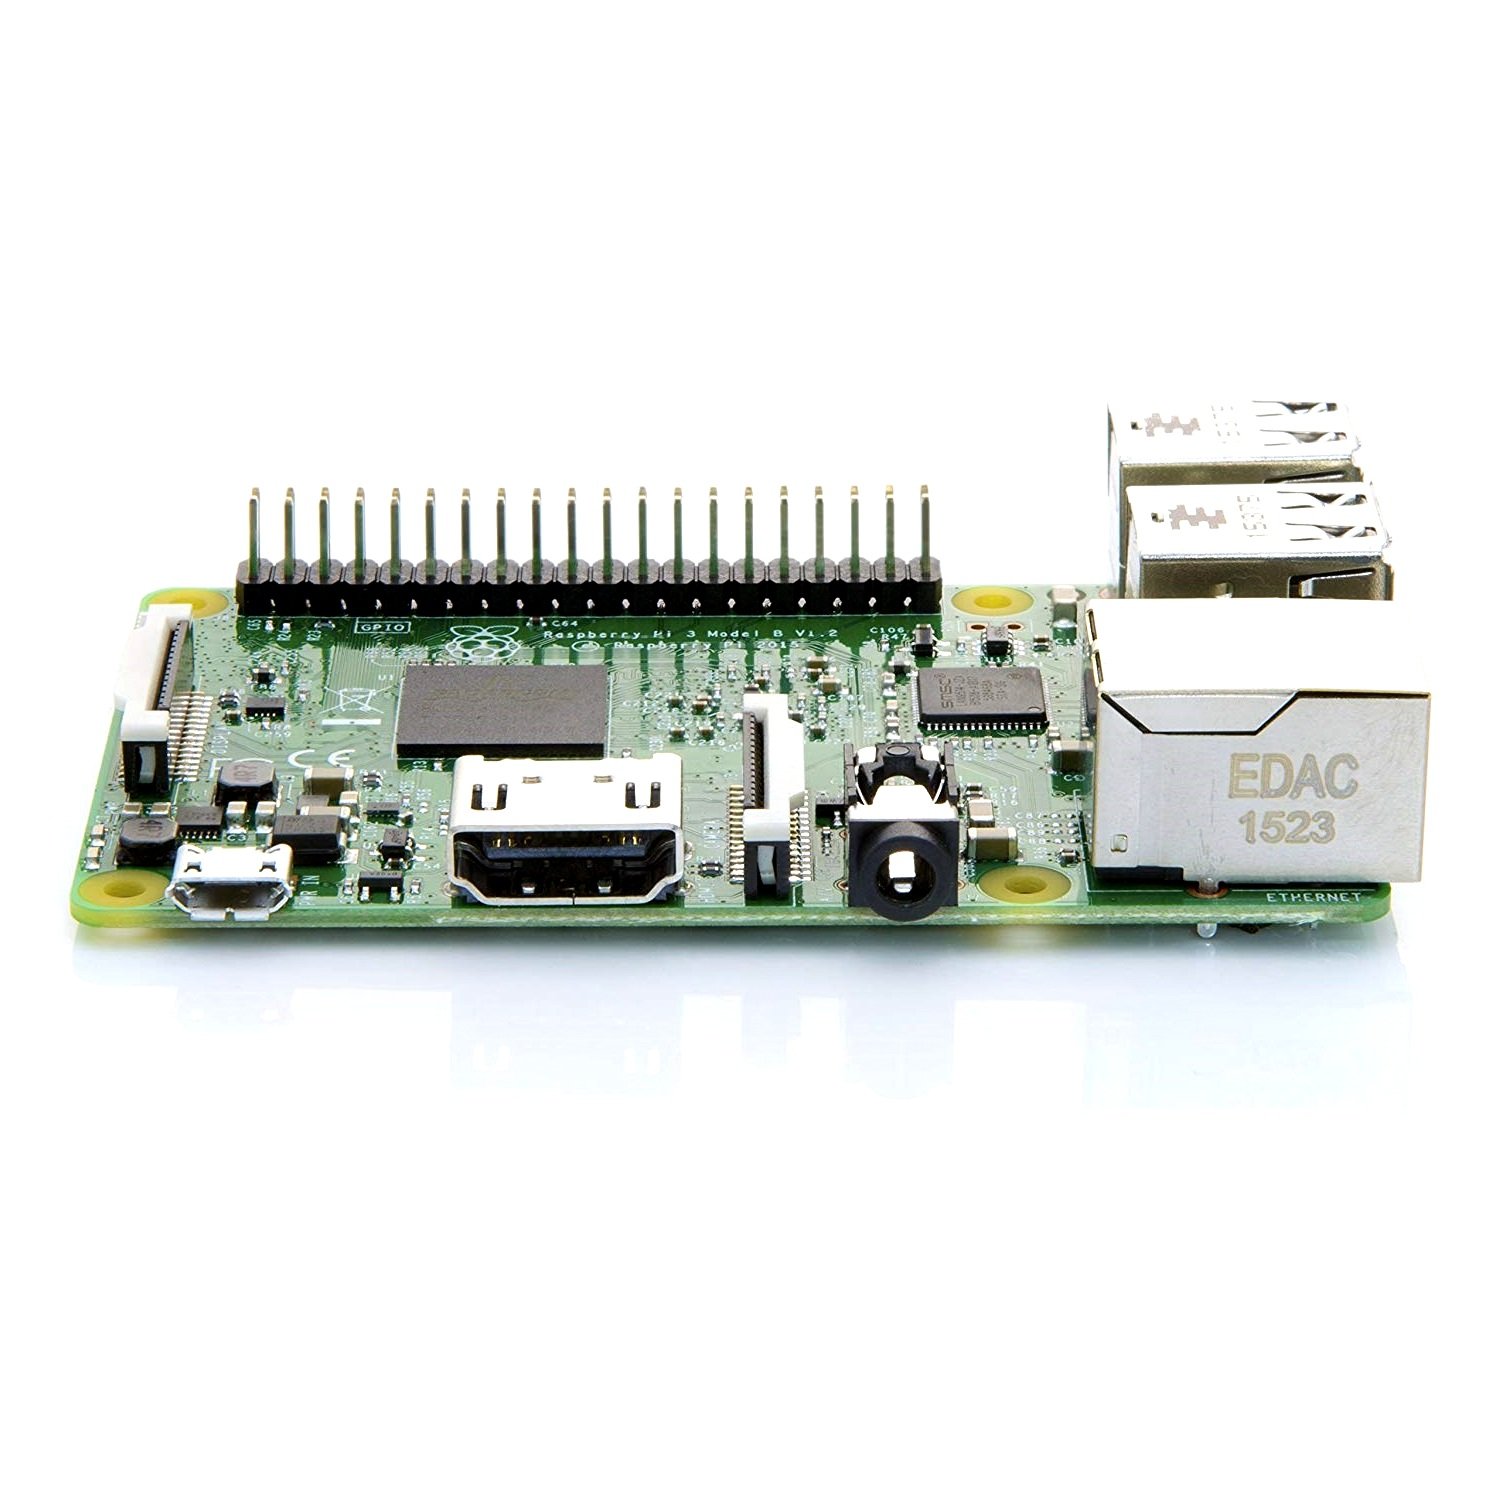 Raspberry Pi 3 - Model B Original with Onboard WiFi and Bluetooth